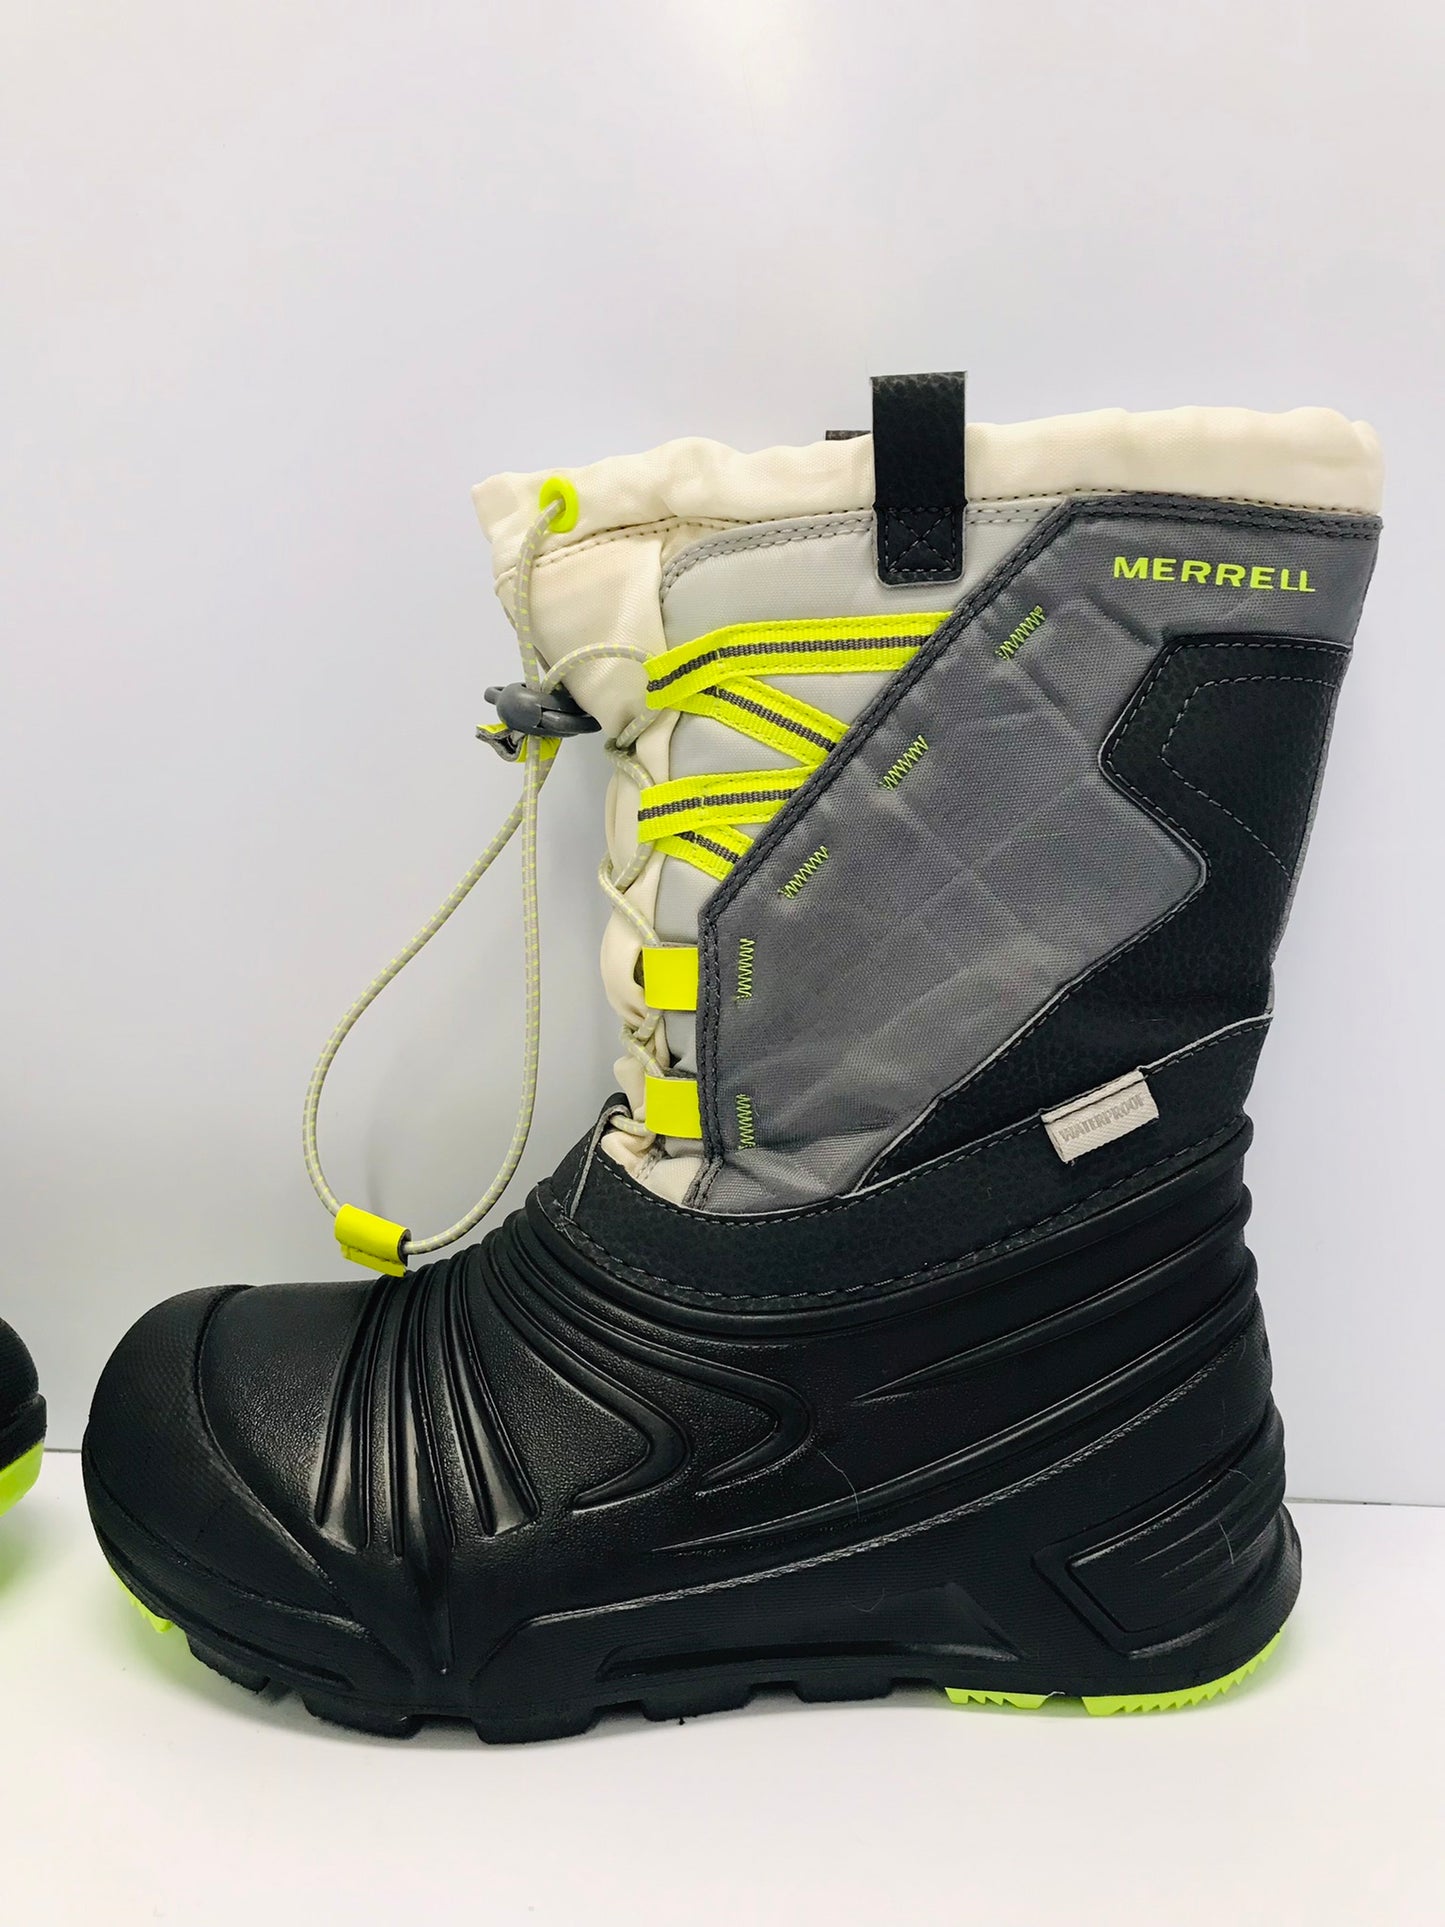 Winter Boots Child Size 3 Merrell  Waterproof Rubber Soles Black Lime New Demo Model